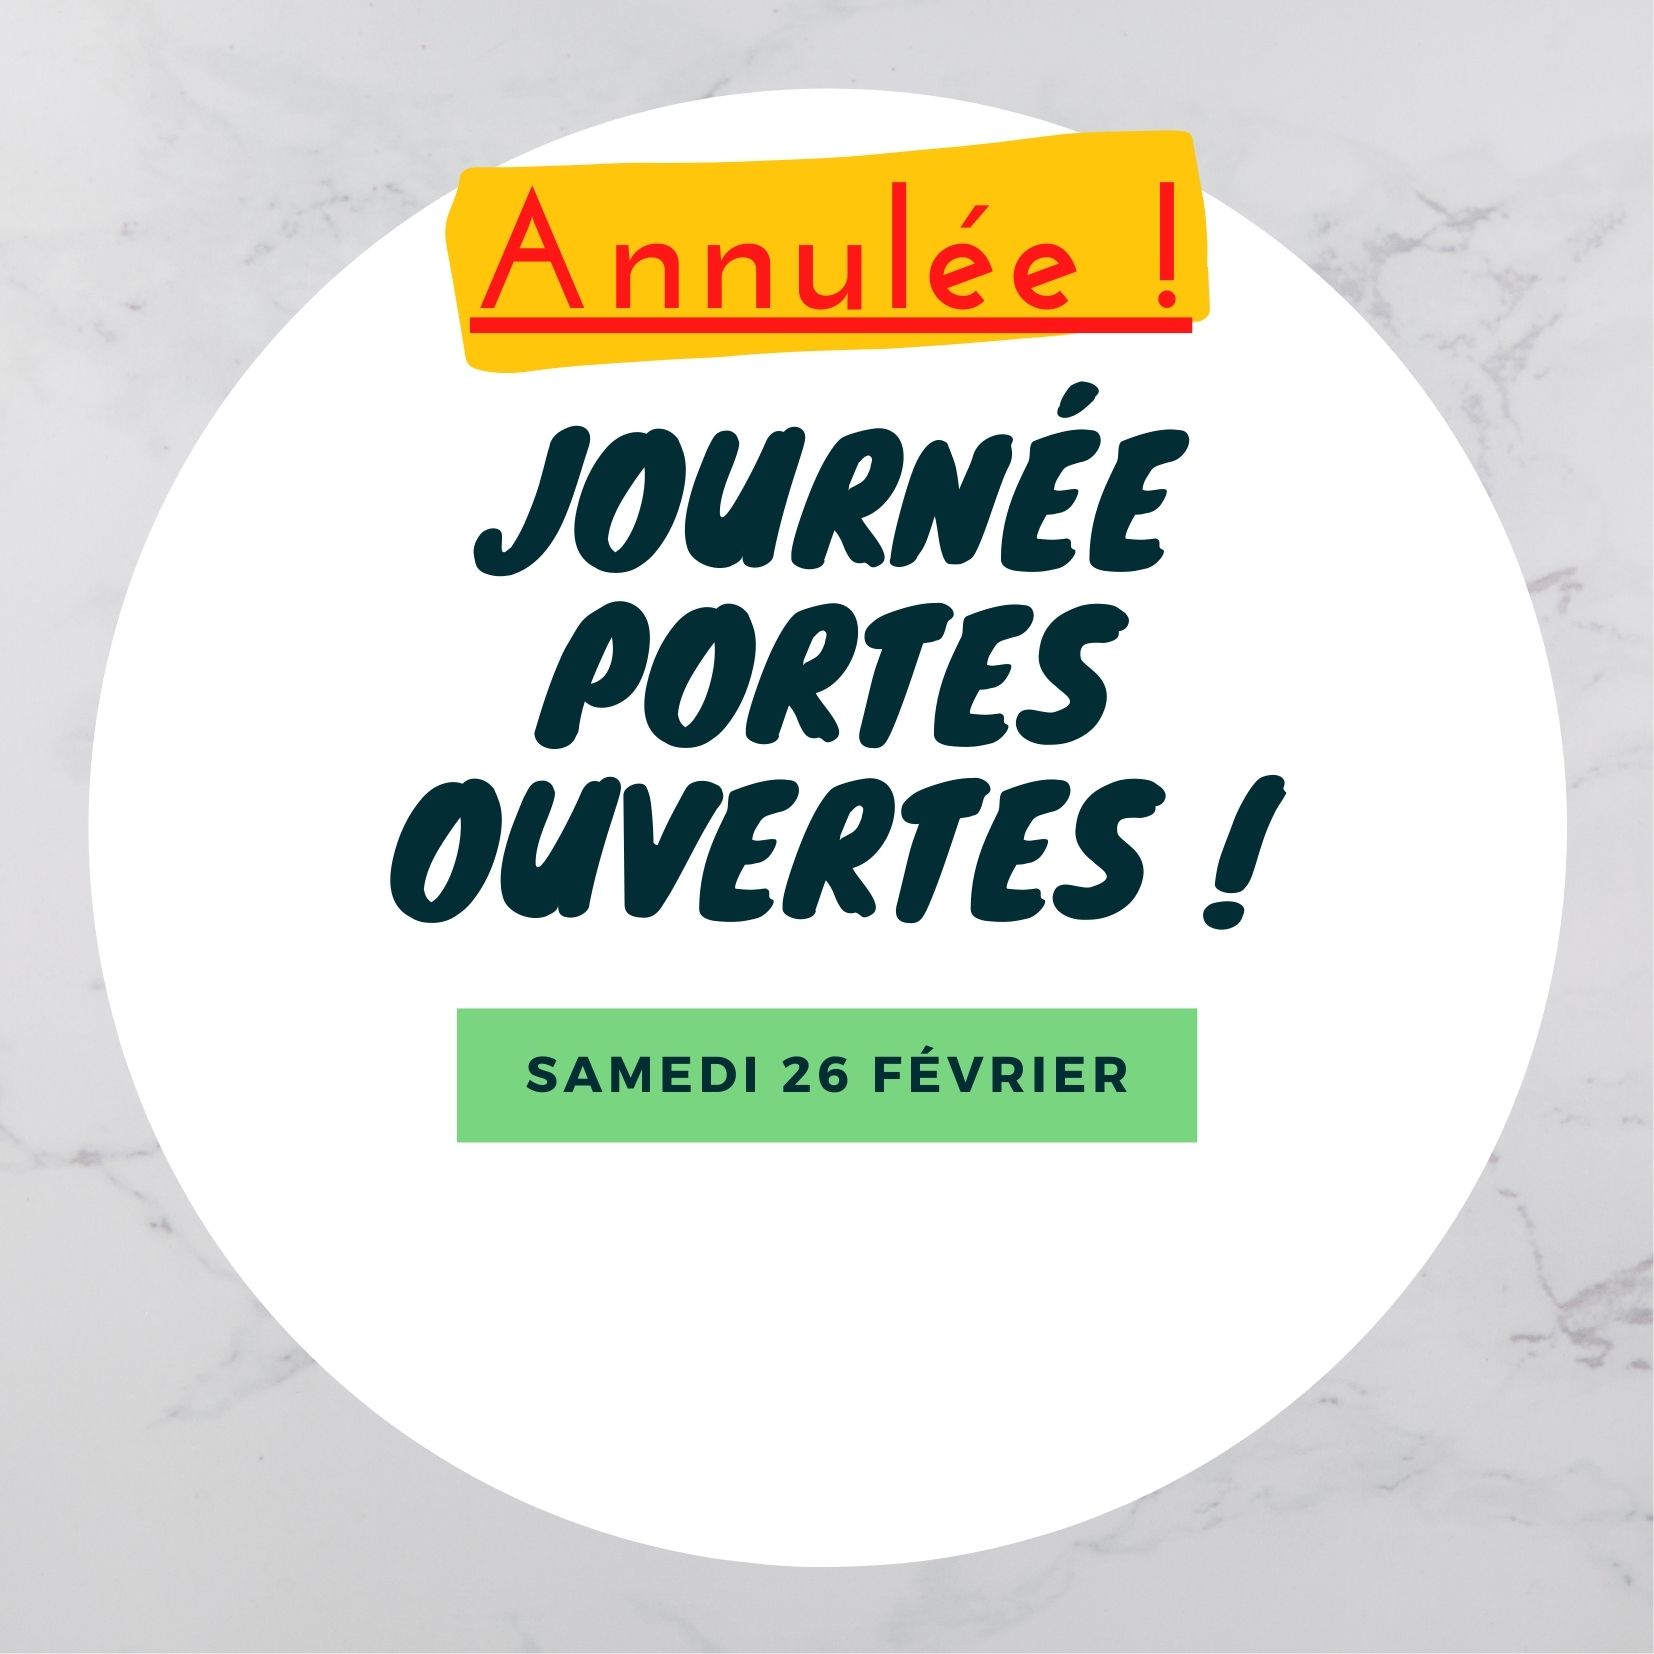 You are currently viewing Annulation : Journée portes ouvertes